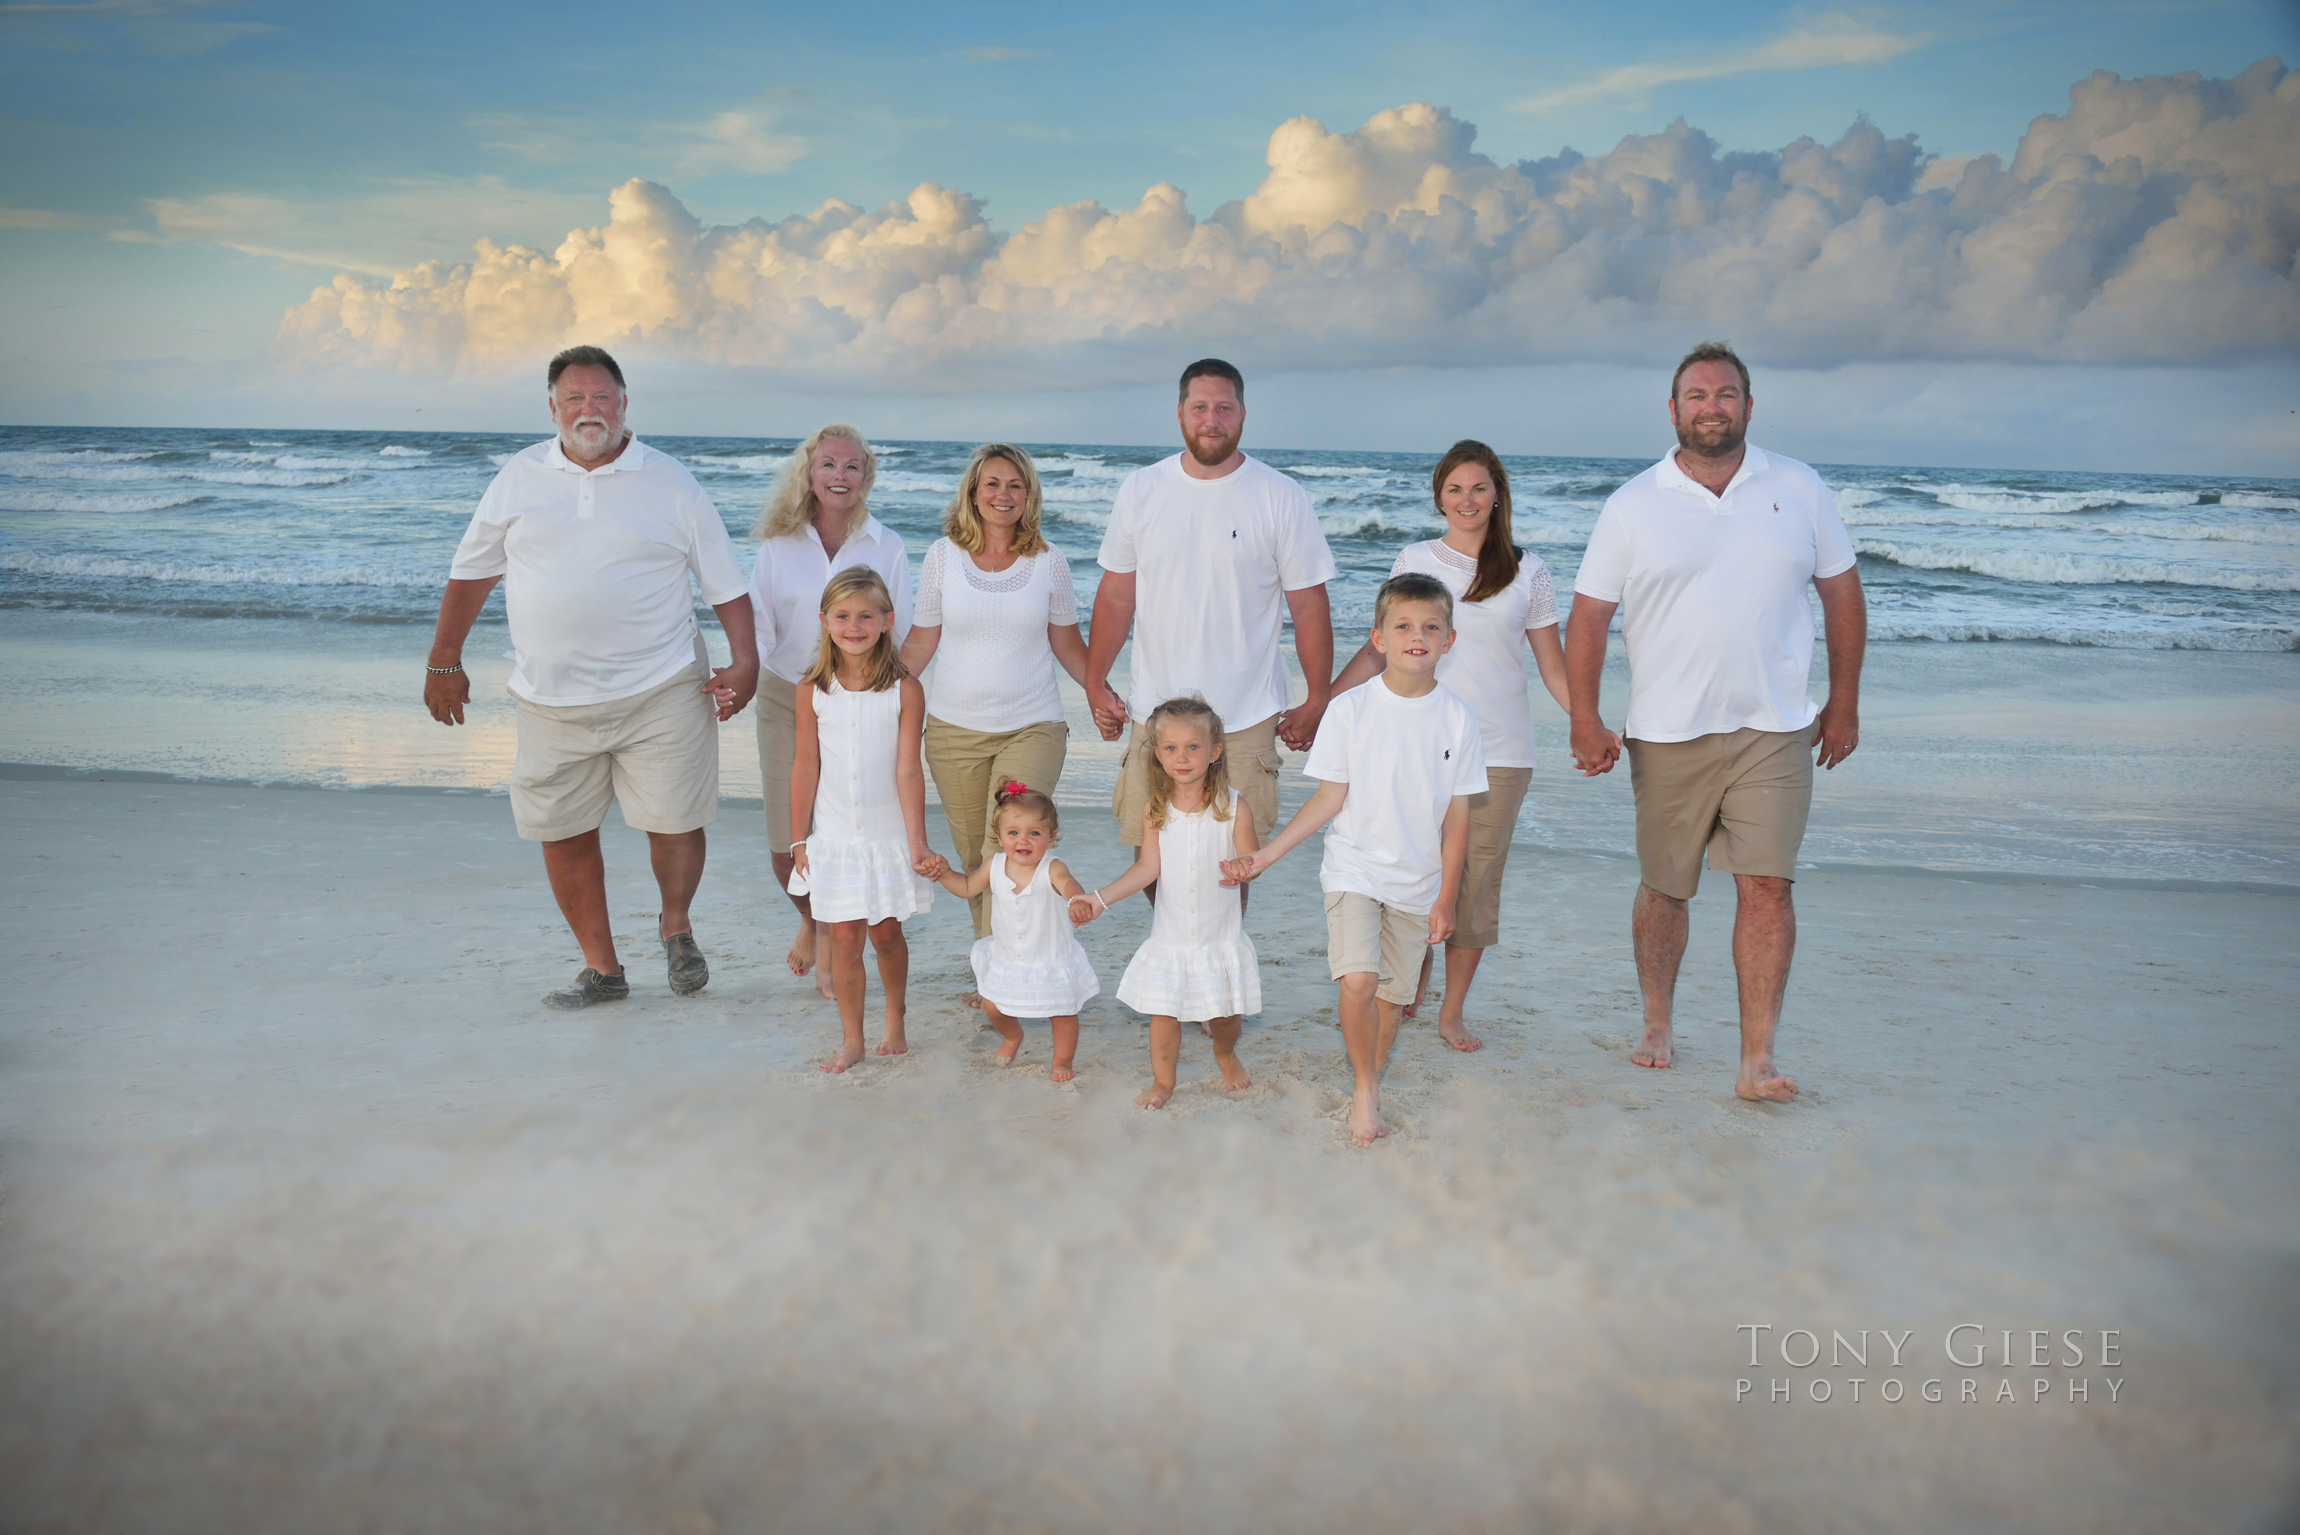 Mid summer is the time of year for fun family beach portraits. Photography by Tony Giese Photography.